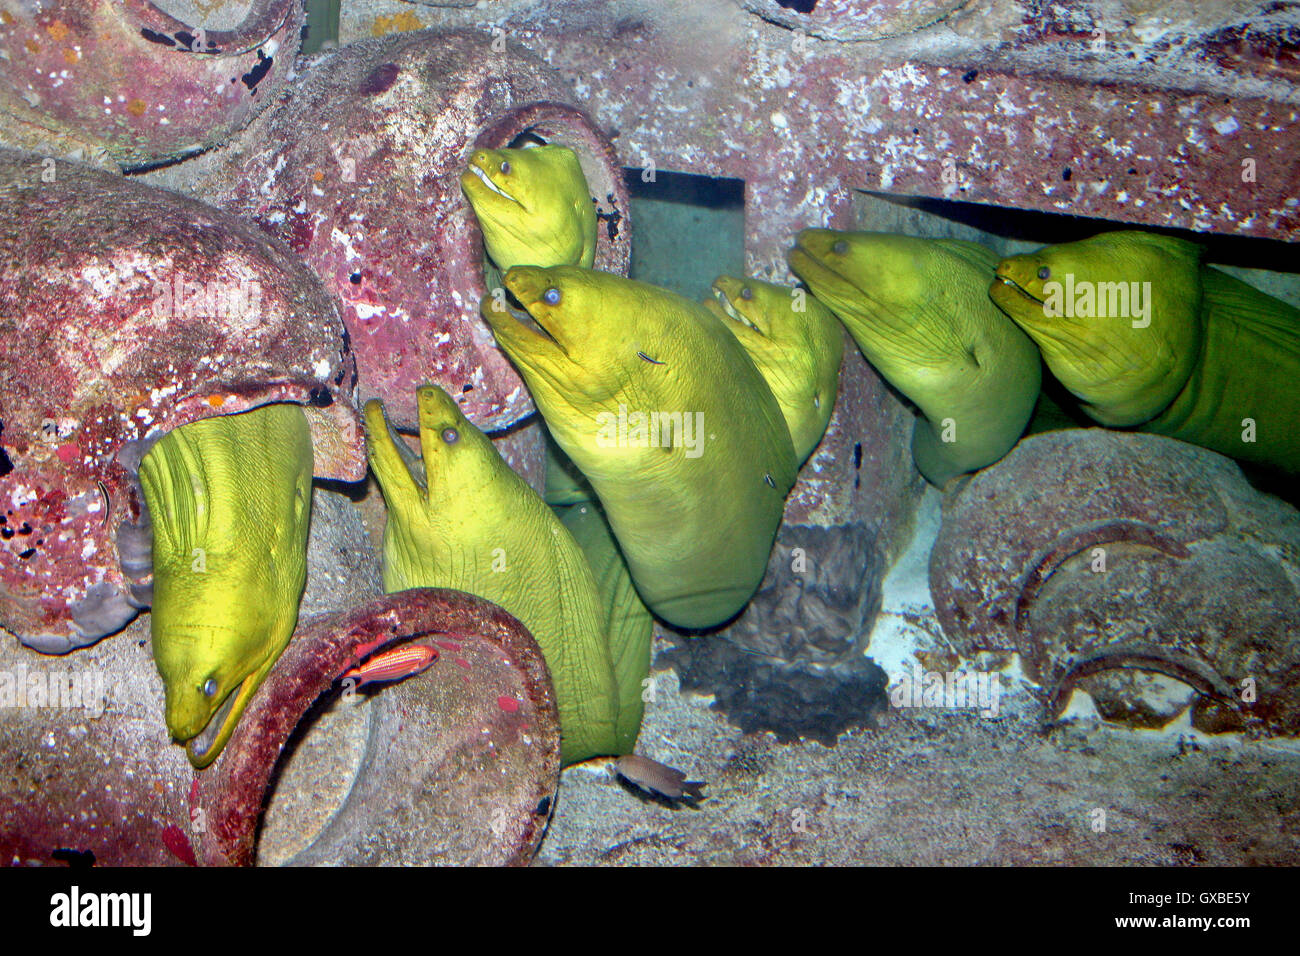 A group of yellow eels in a tank Stock Photo